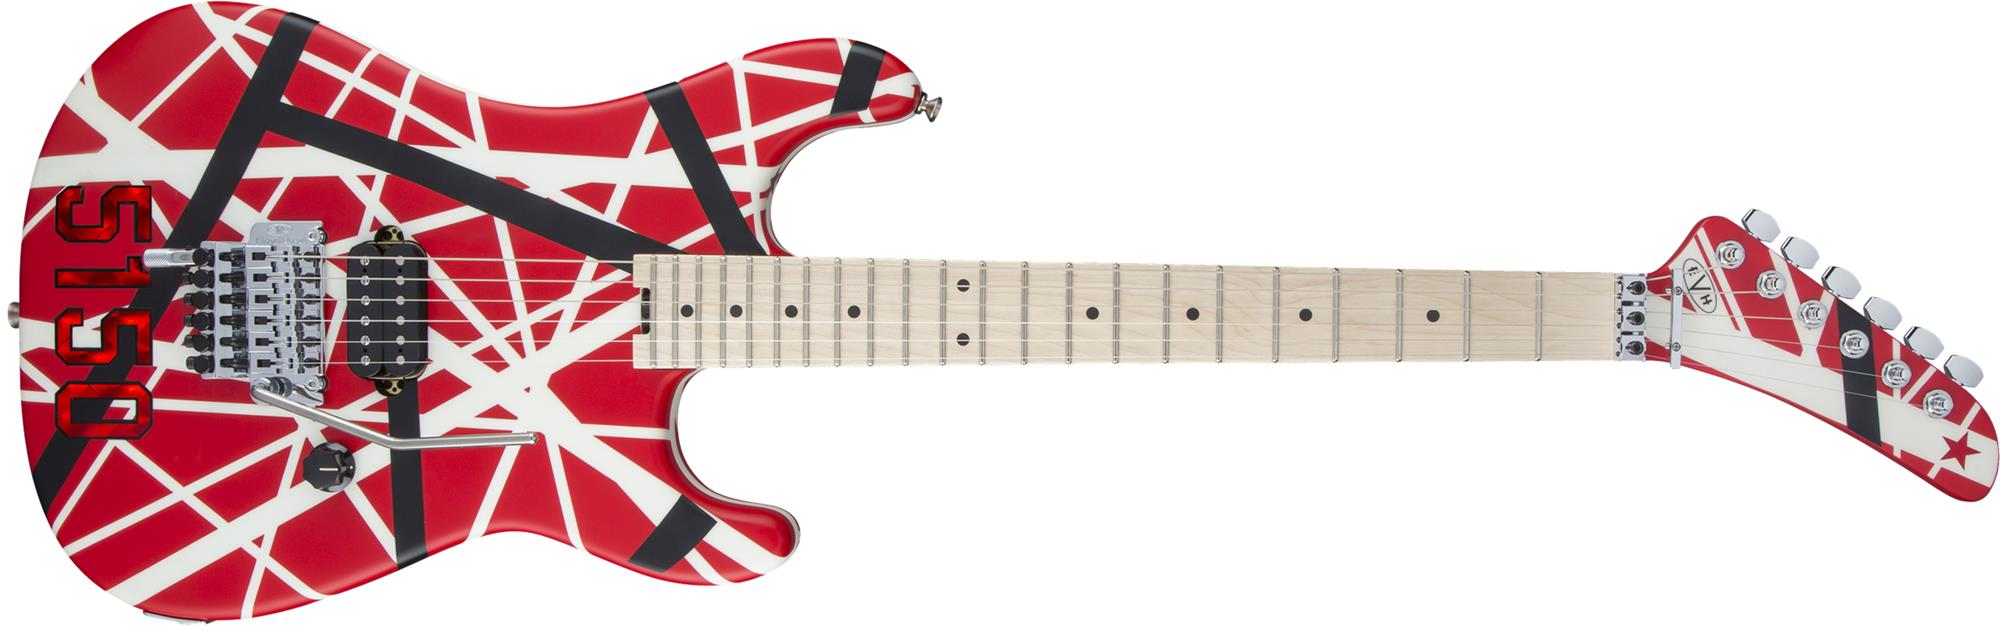 EVH-Striped-Series-5150-Mn-Red-With-Black-And-White-Stripes-5107902515-sku-25031